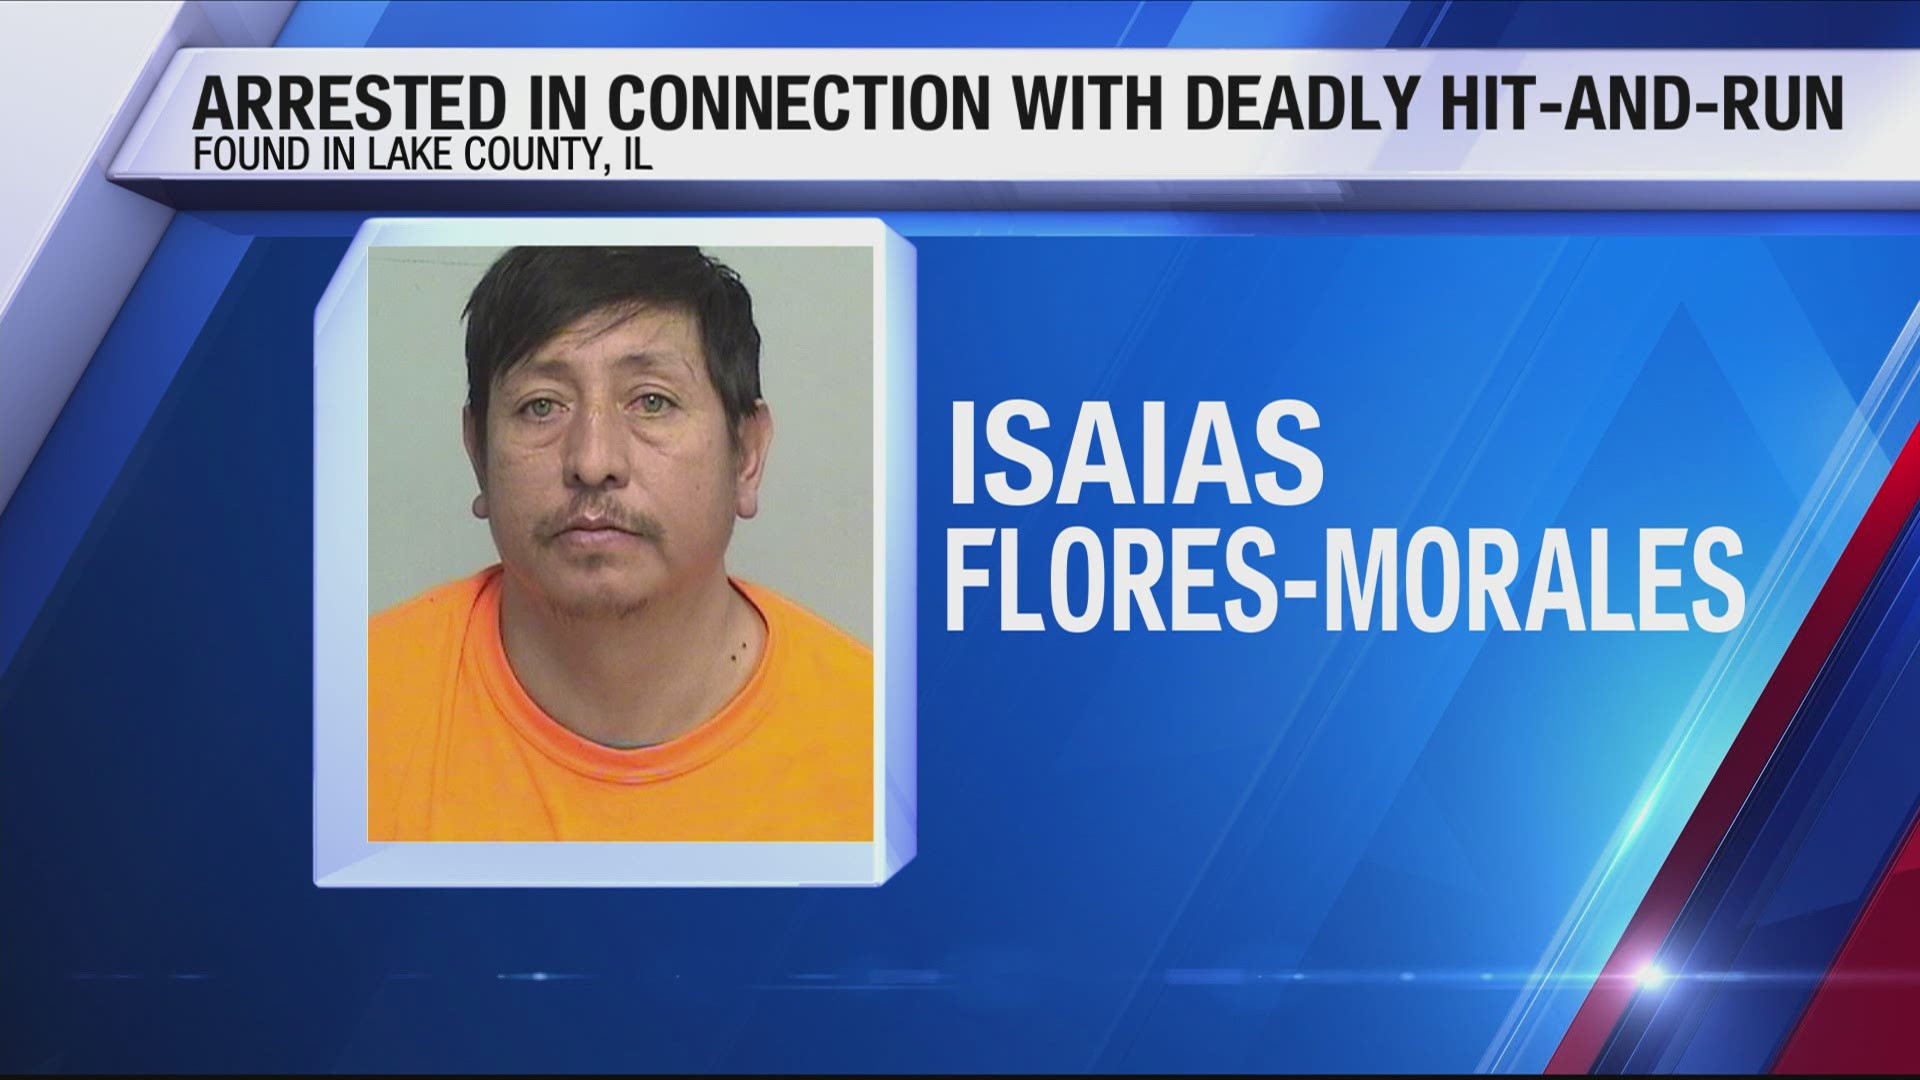 The Lake County Sheriff's Office in Illinois arrested Isaias Flores-Morales.